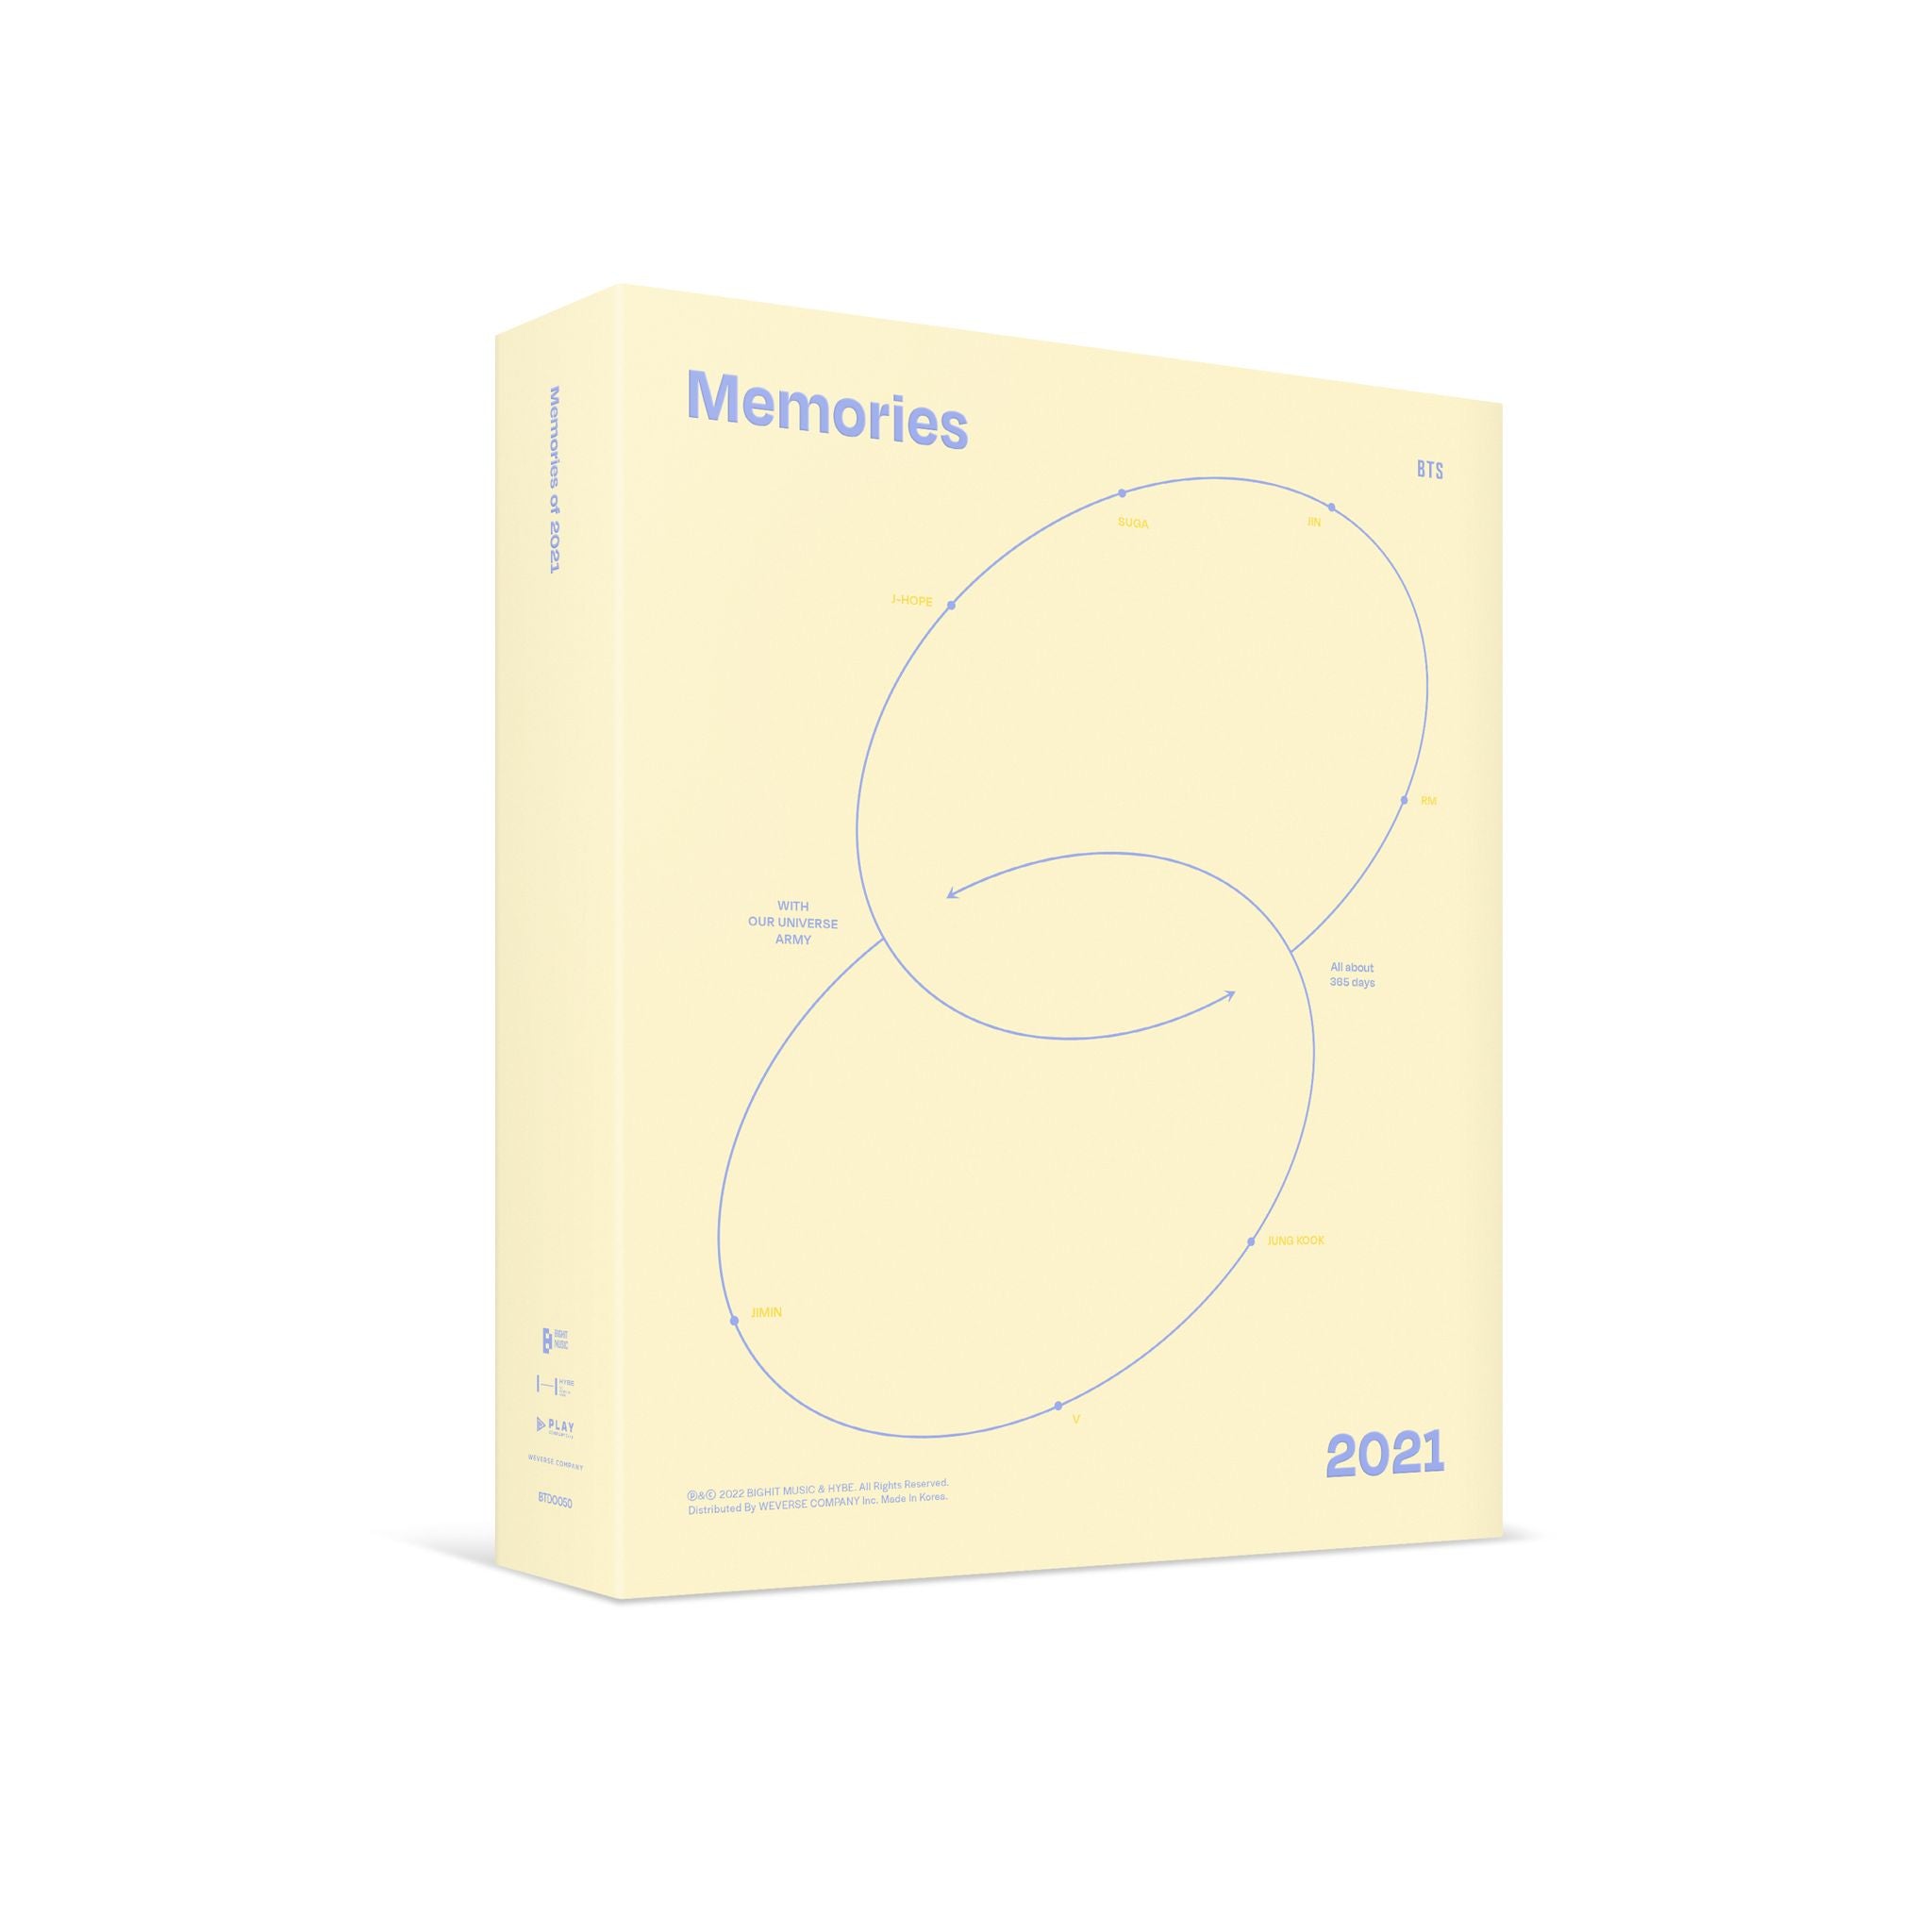 BTS - MEMORIES OF 2021 DIGITAL CODE (Free Shipping Available)